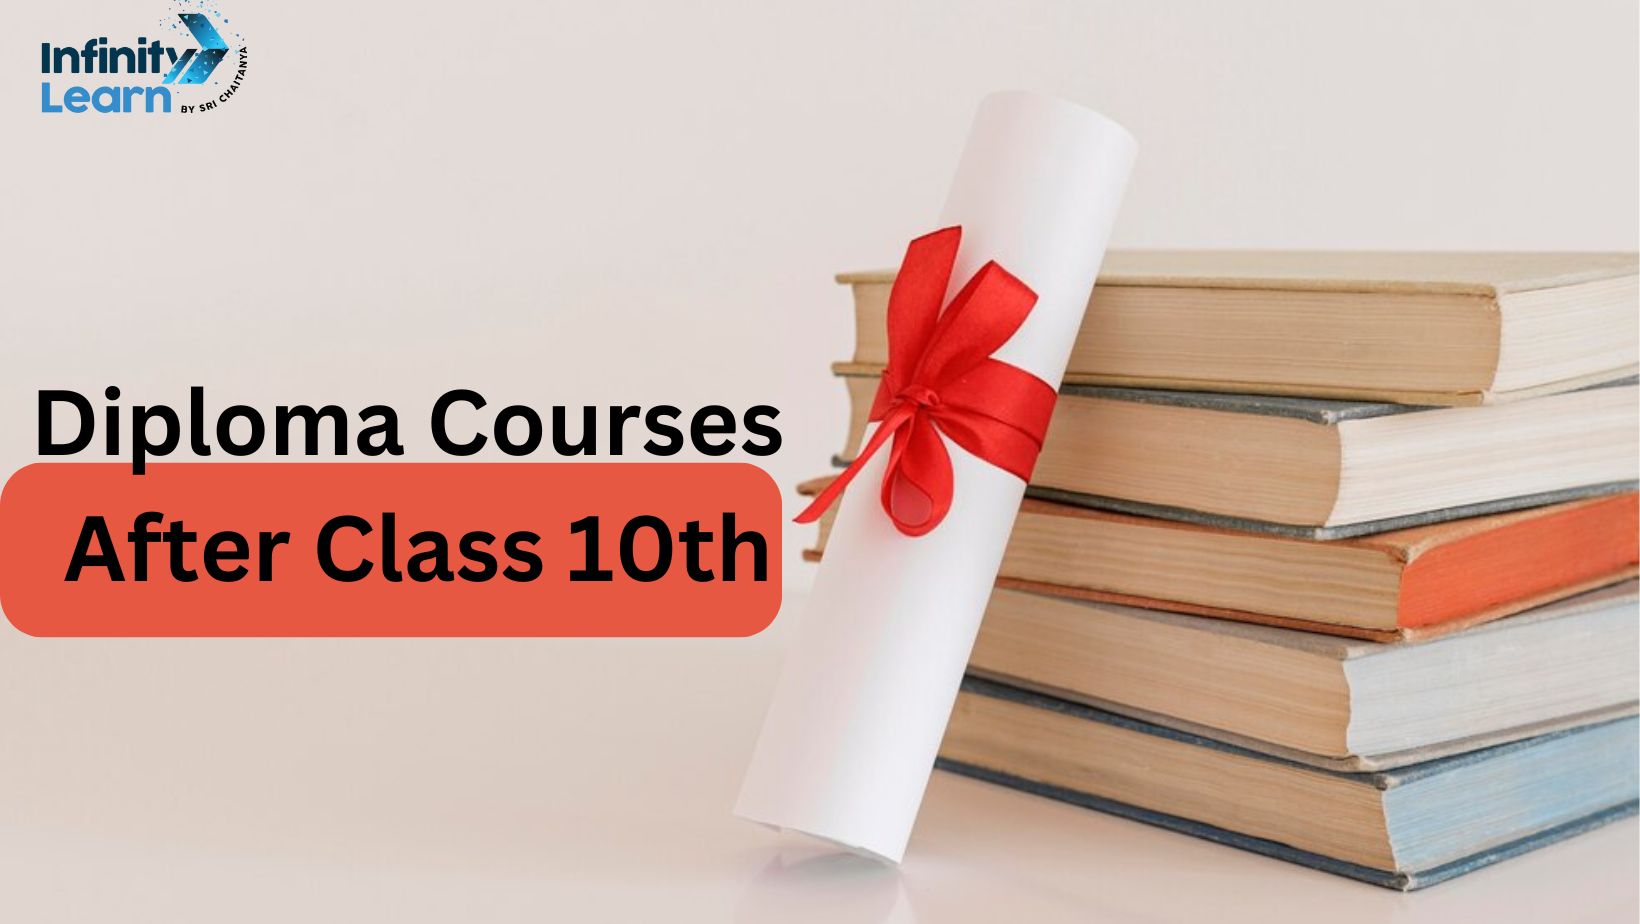 Diploma Courses After Class 10th